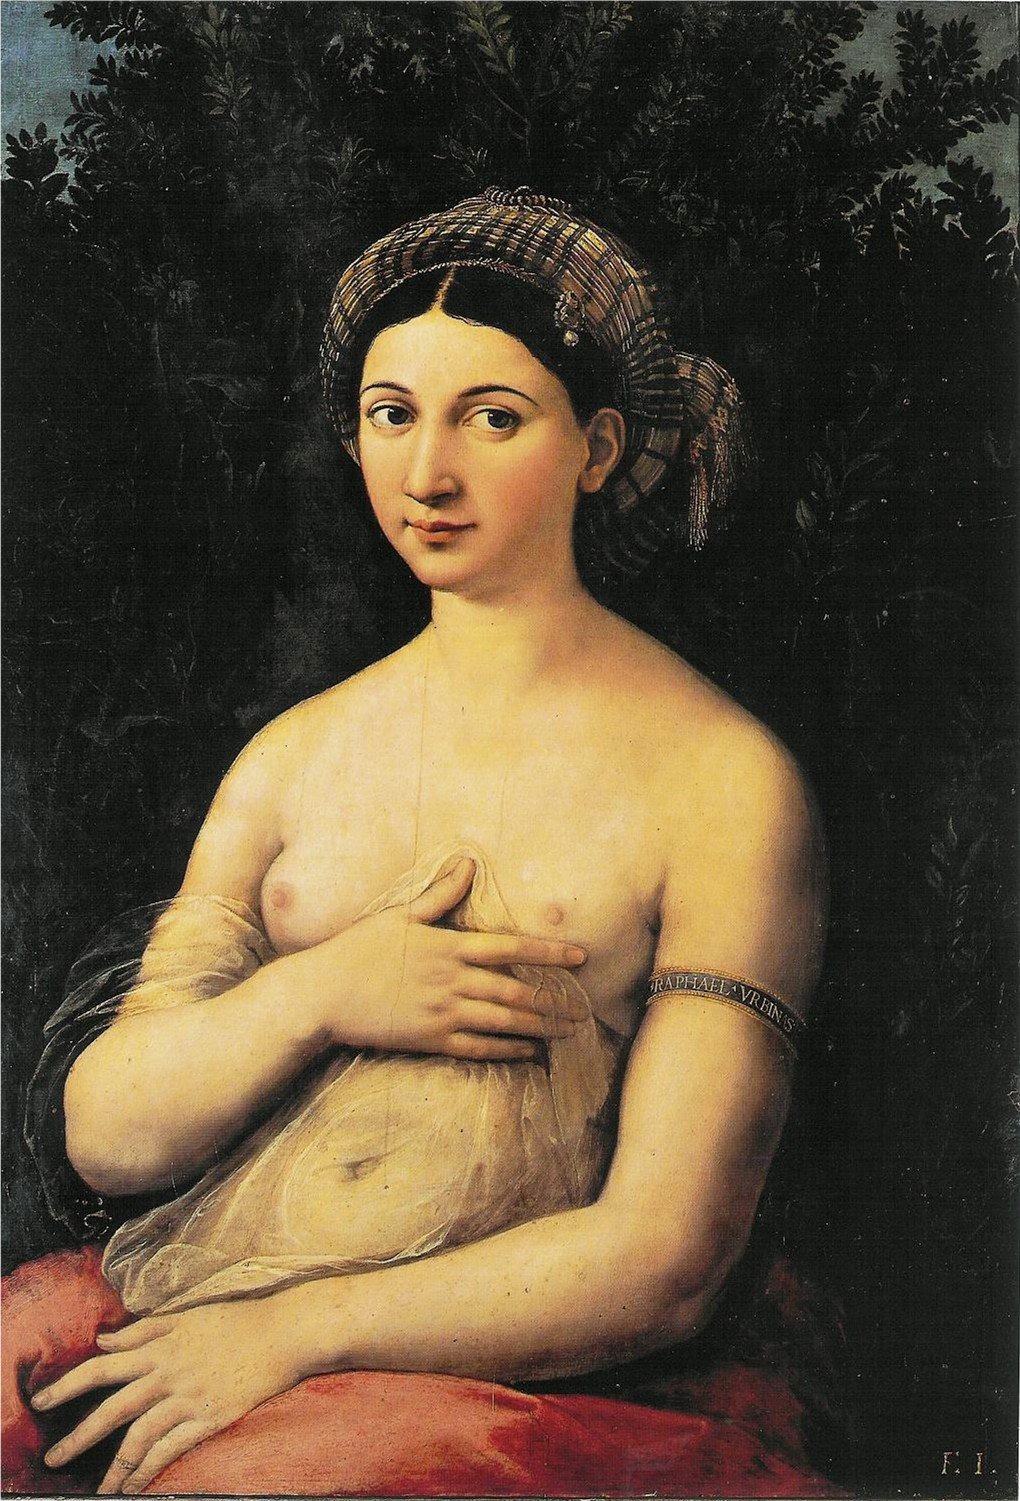 The 10 Best Artworks by Raphael, Seraphic Genius of the Renaissance—Ranked picture picture image